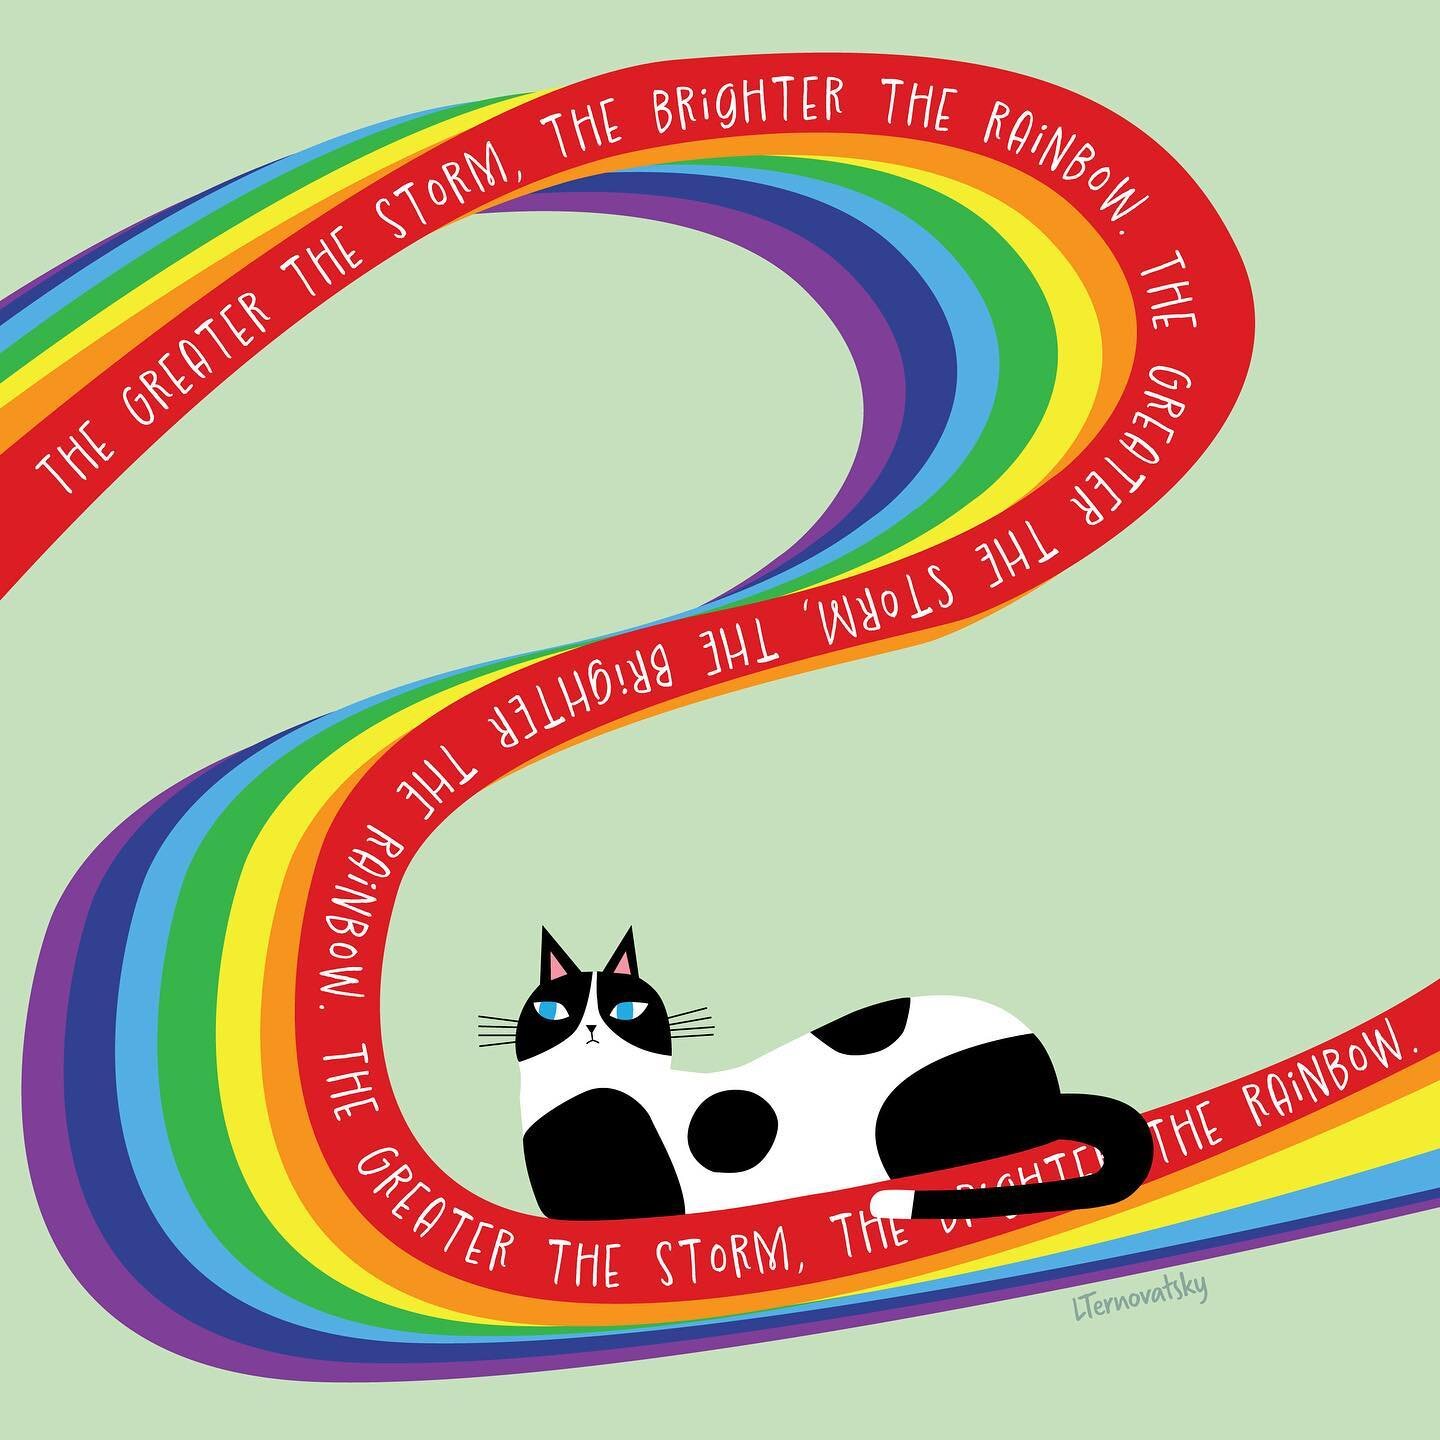 The greater the storm, the brighter the rainbow 🌈 

#catlover #catsofinstagram #catstagram #cats #thoughtoftheday #positivevibes #rainbow #positivenergy #positivequotes #graphicdesigner #graphicdesign #illustration #illustrationartists #artistsofins